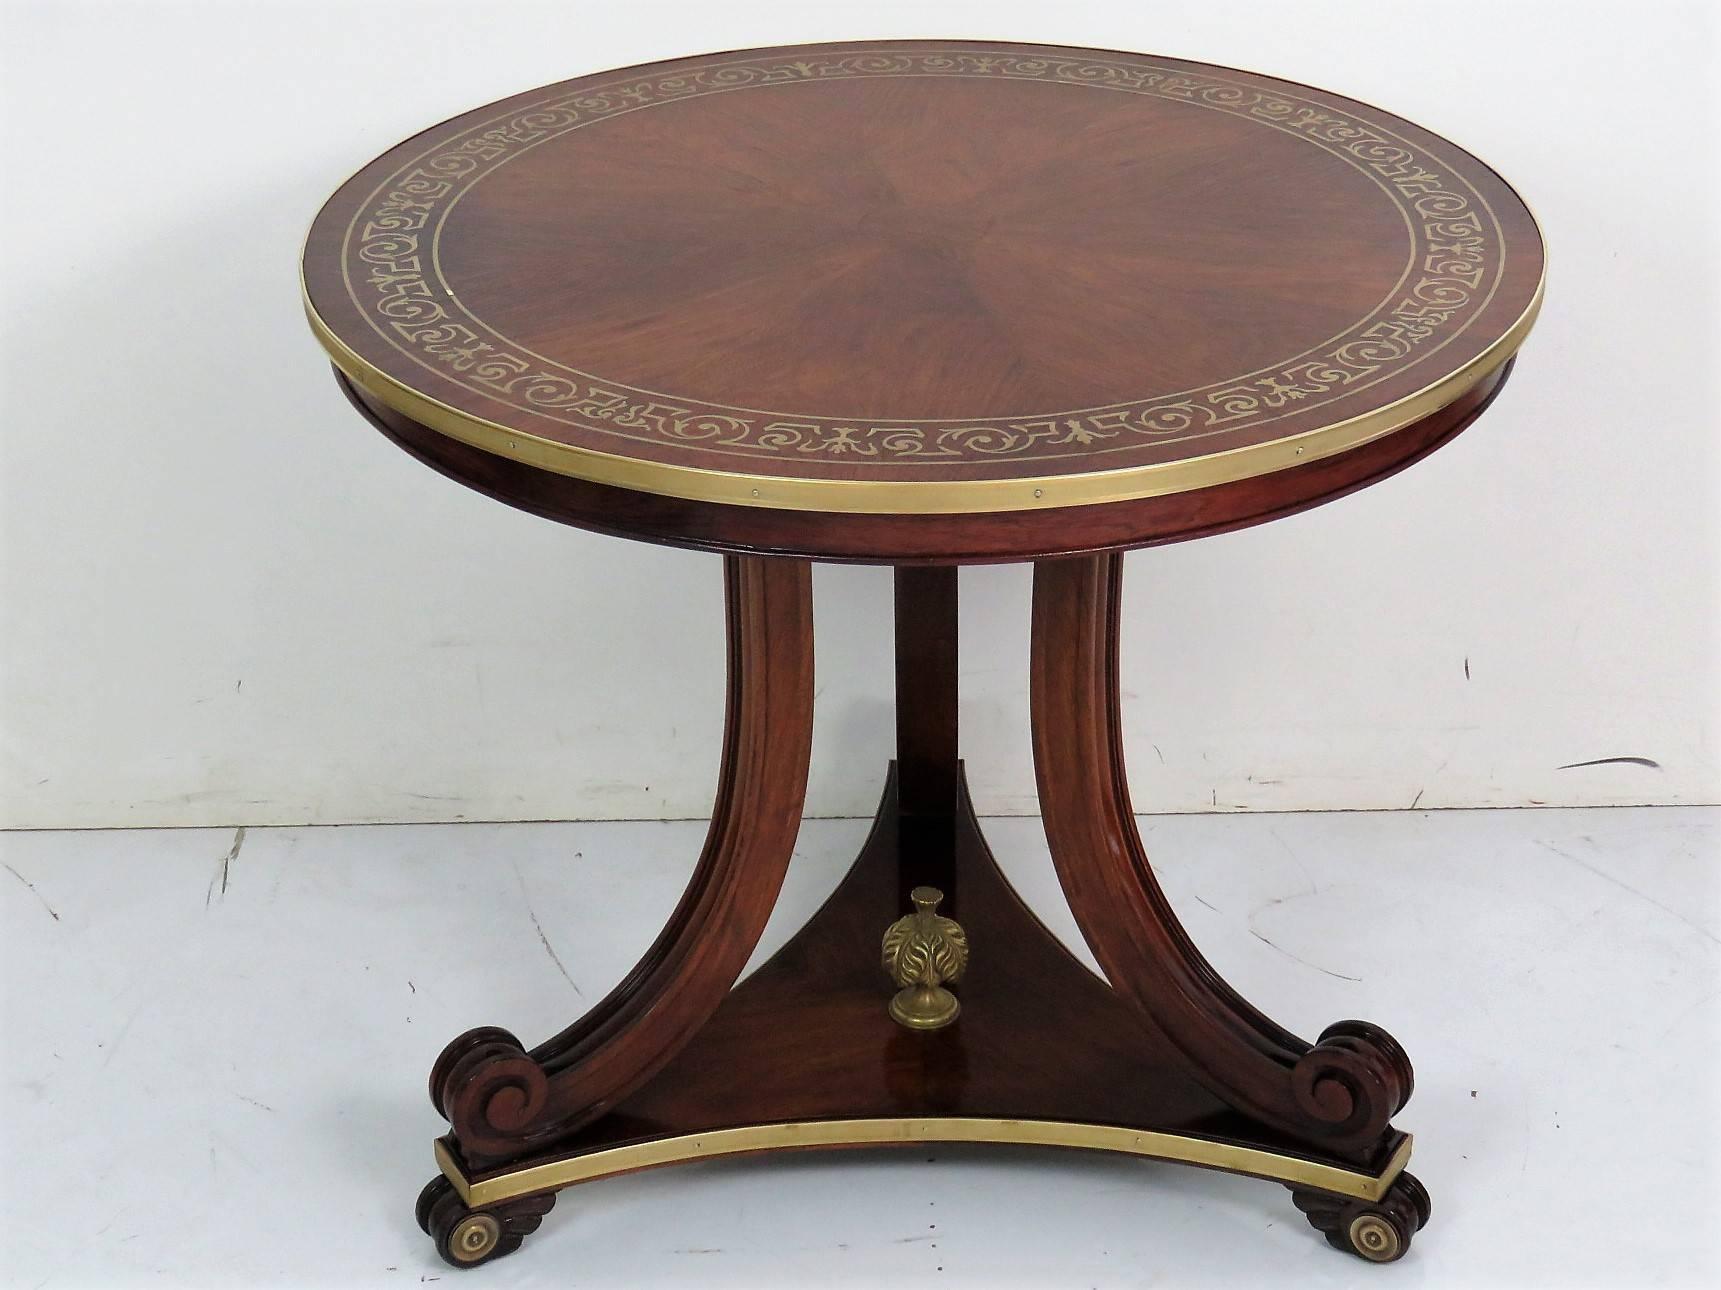 This is a fantastic Russian or perhaps the Baltic Region Boulle inlaid brass and mahogany center table. The table is in good condition and has a very distinctive look and design. 